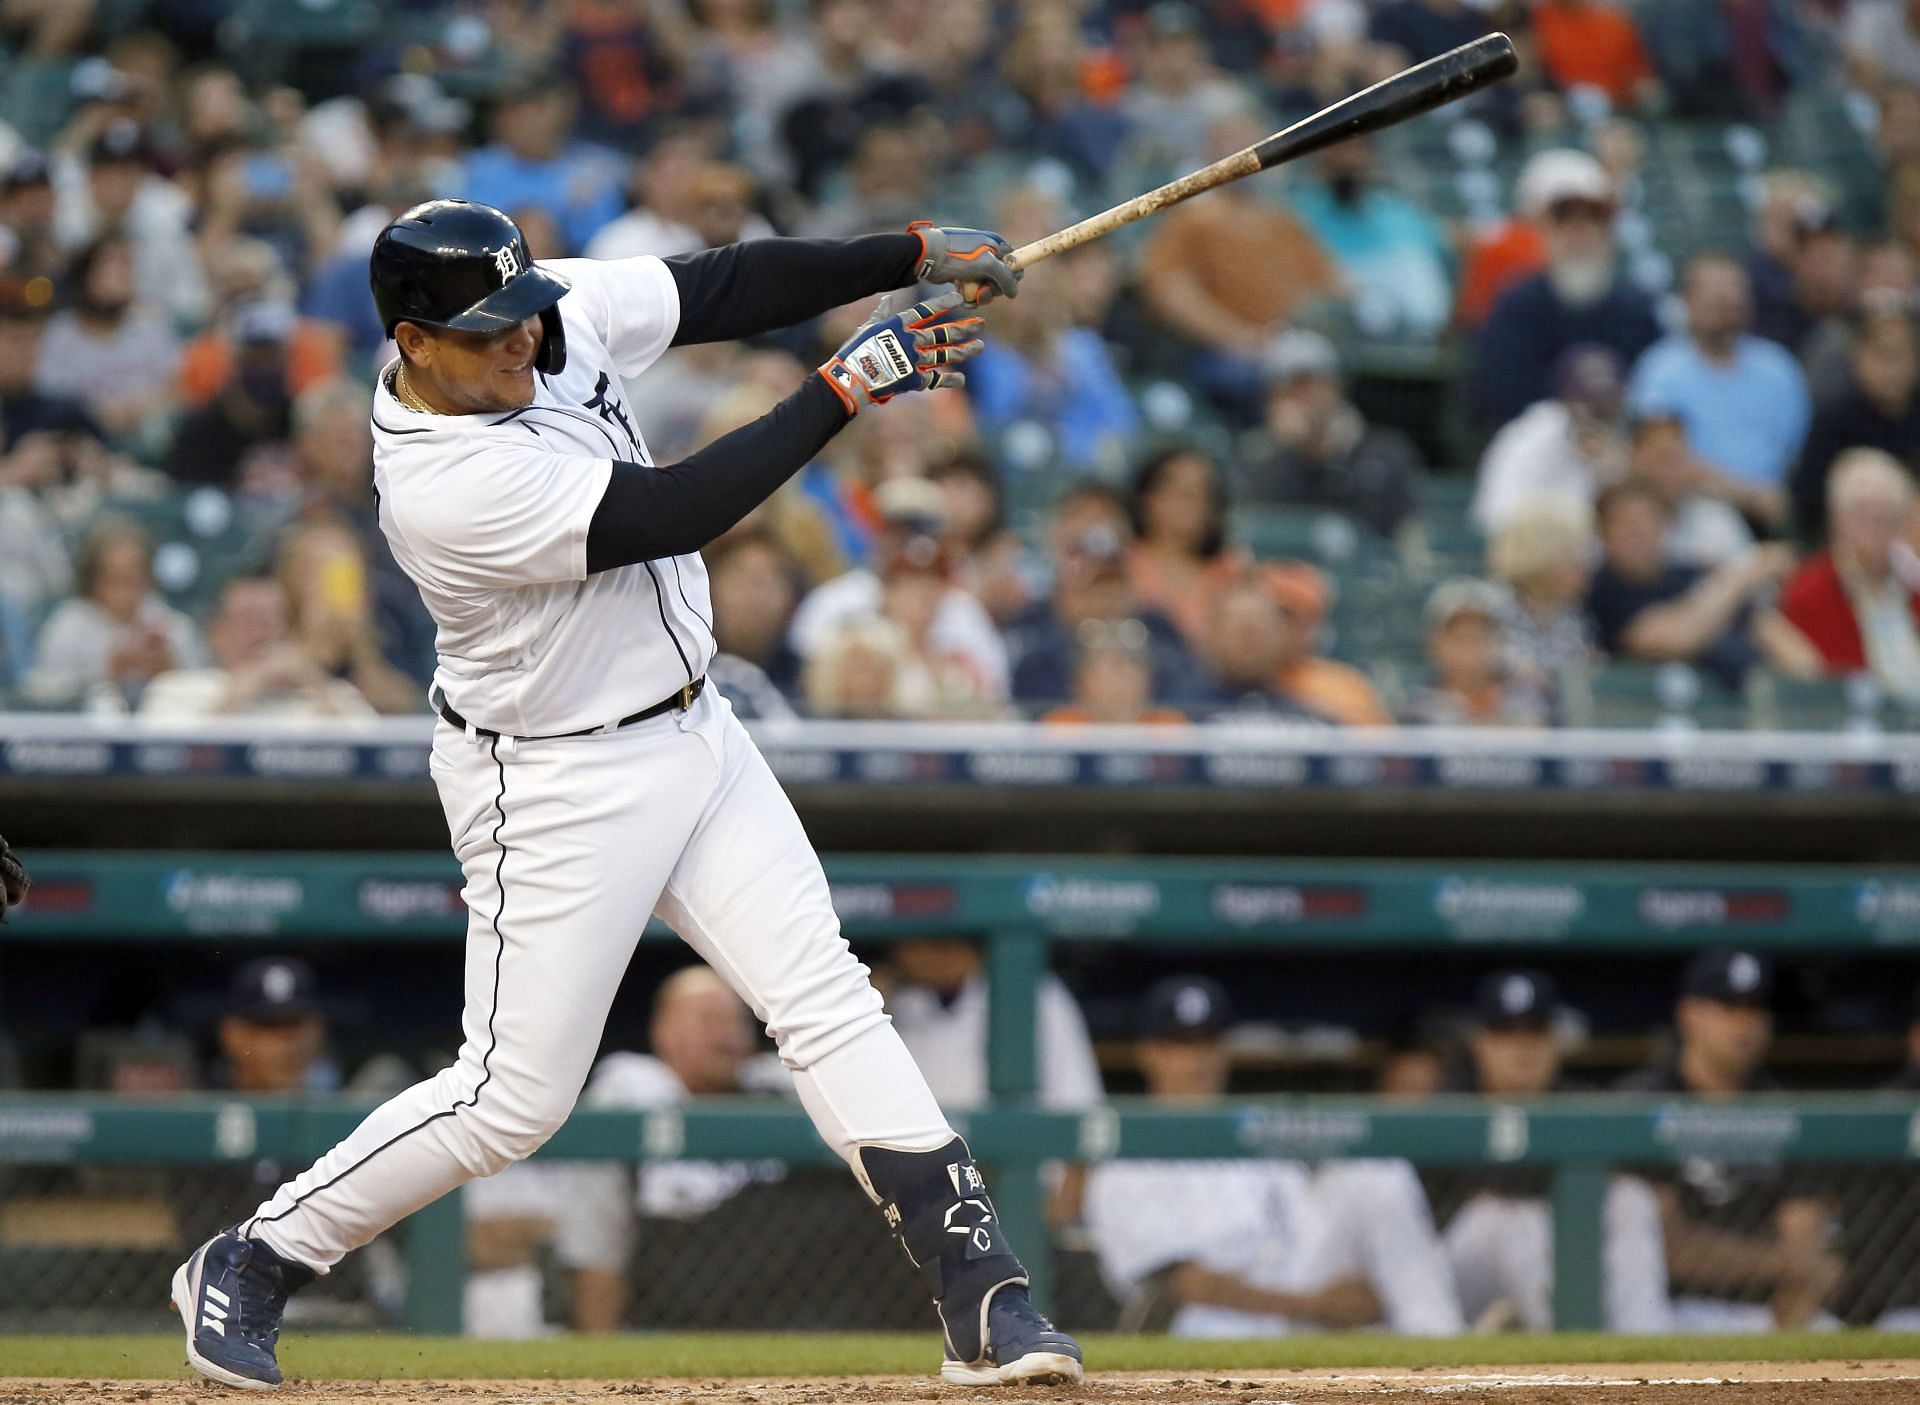 Miguel Cabrera takes a swing at a pitch during a Tampa Bay Rays v Detroit Tigers game